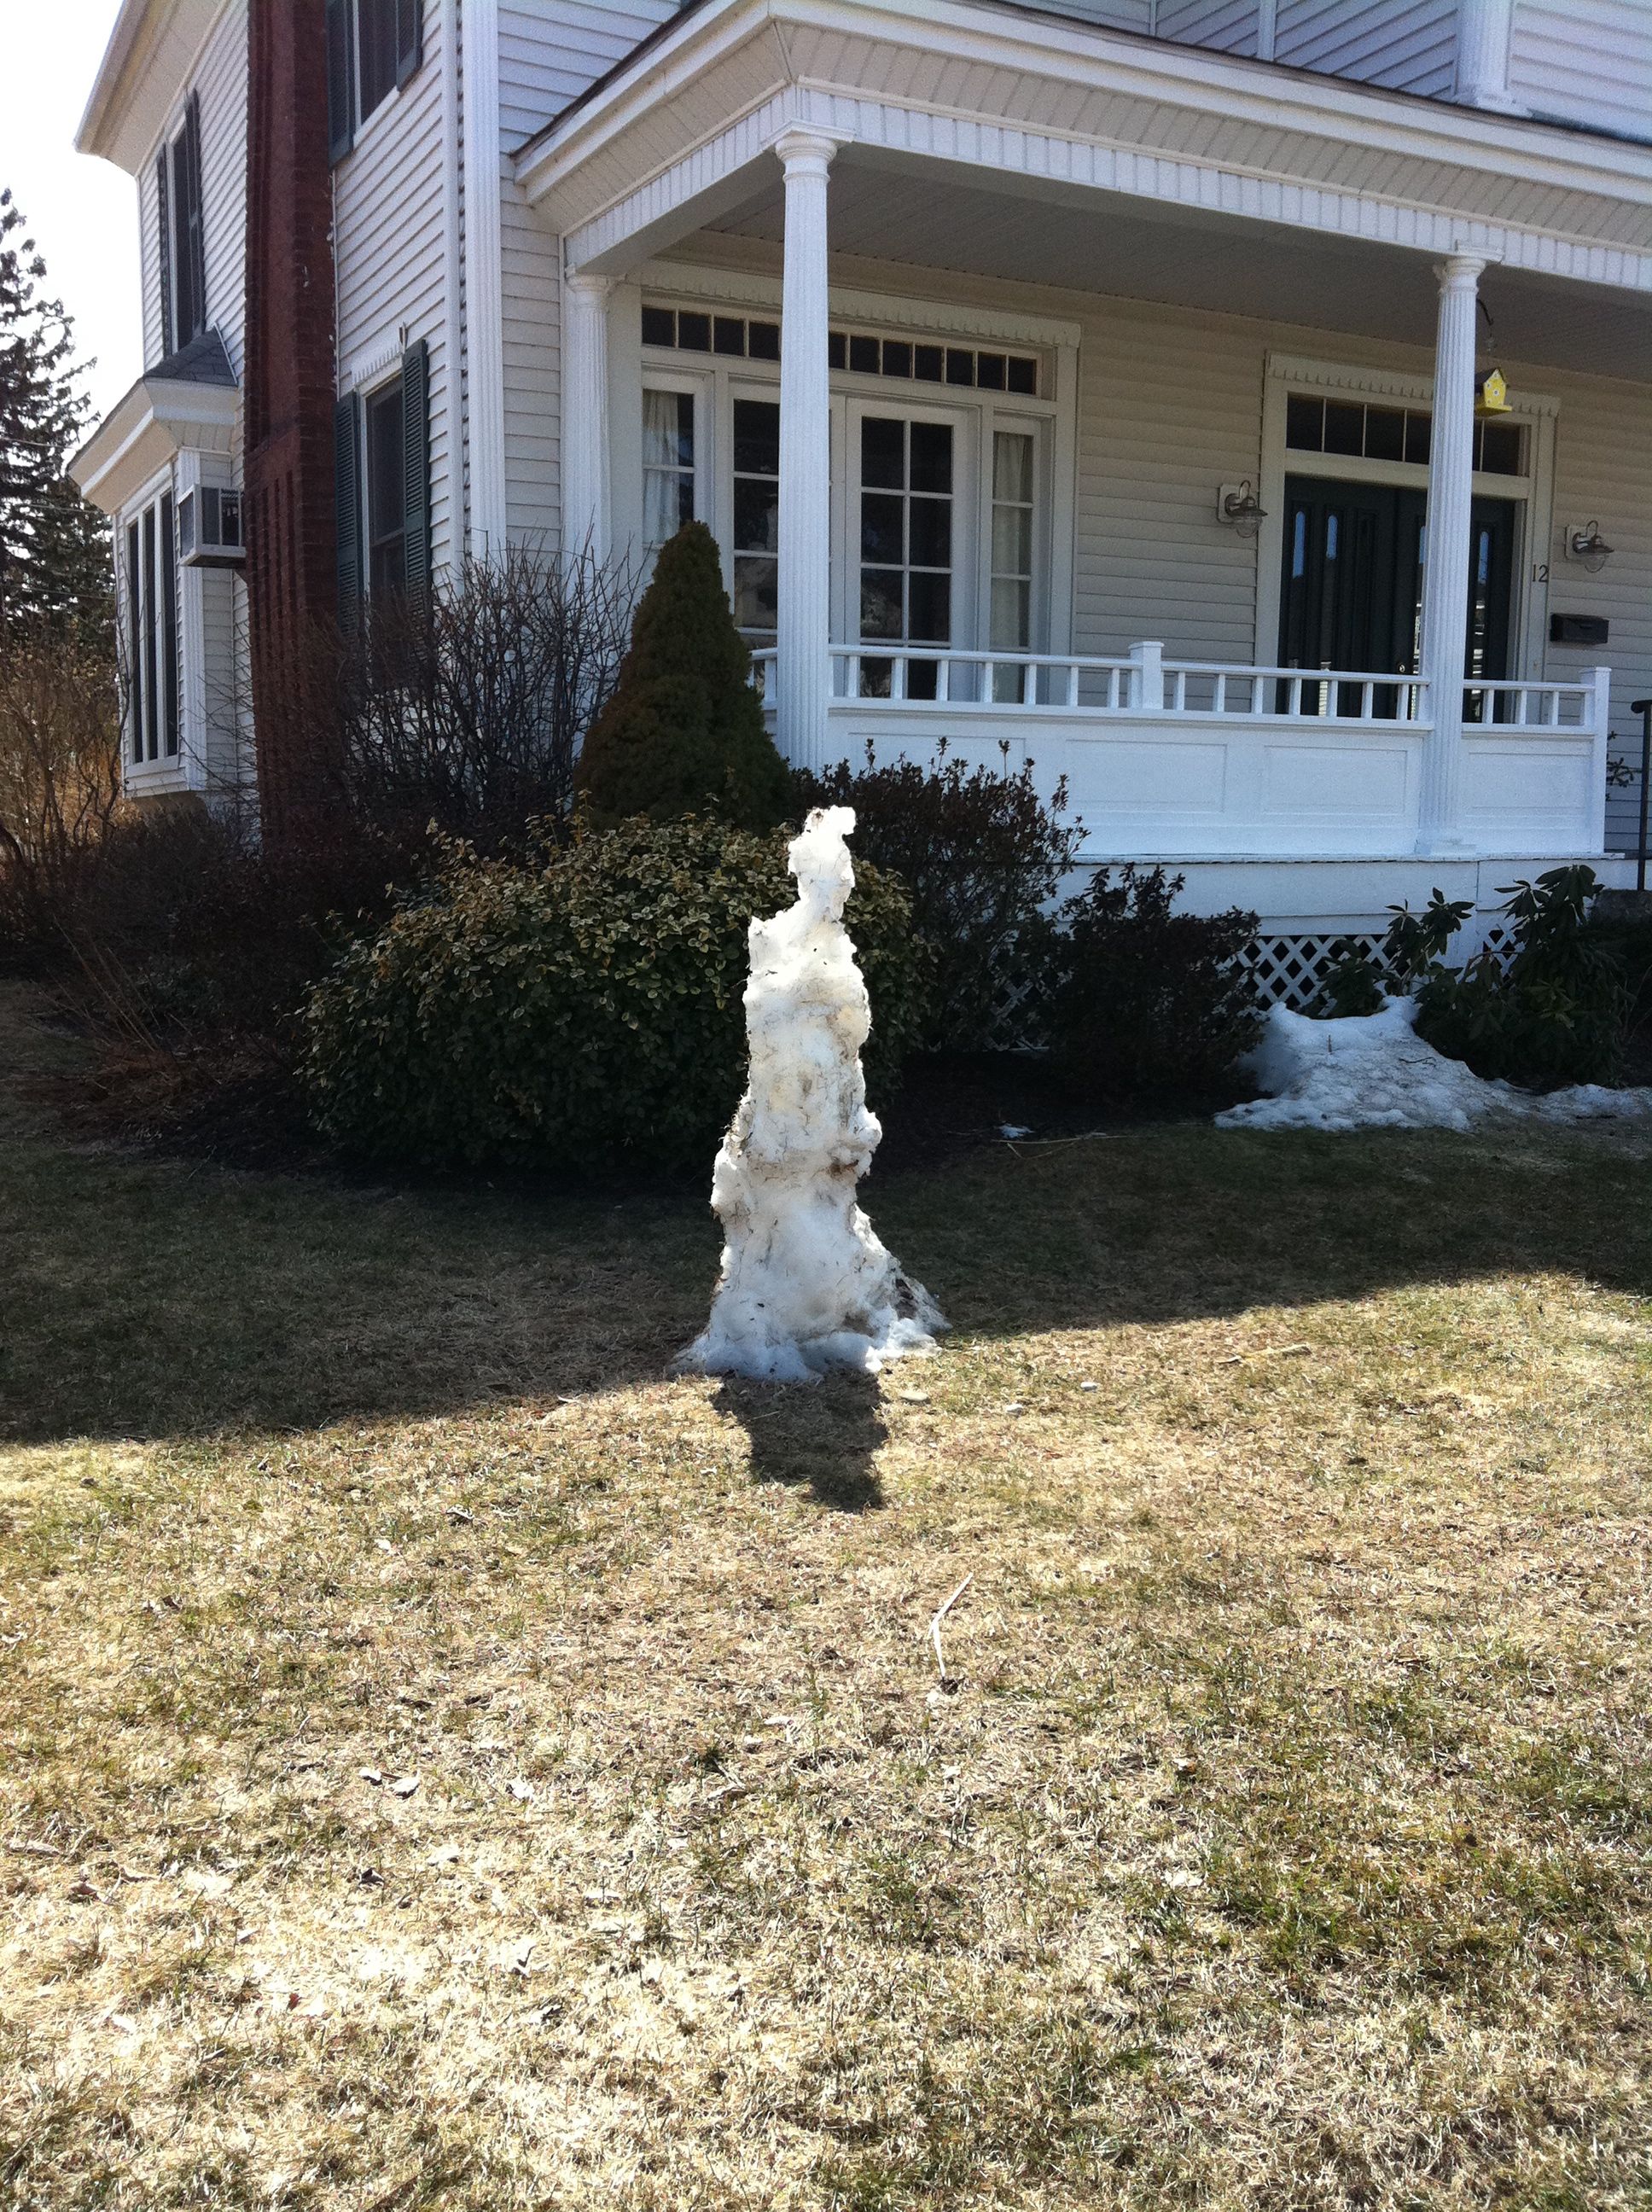 Our neighbor still has a snowman hanger-on. He's not gone yet, though he does look a little pitiful.